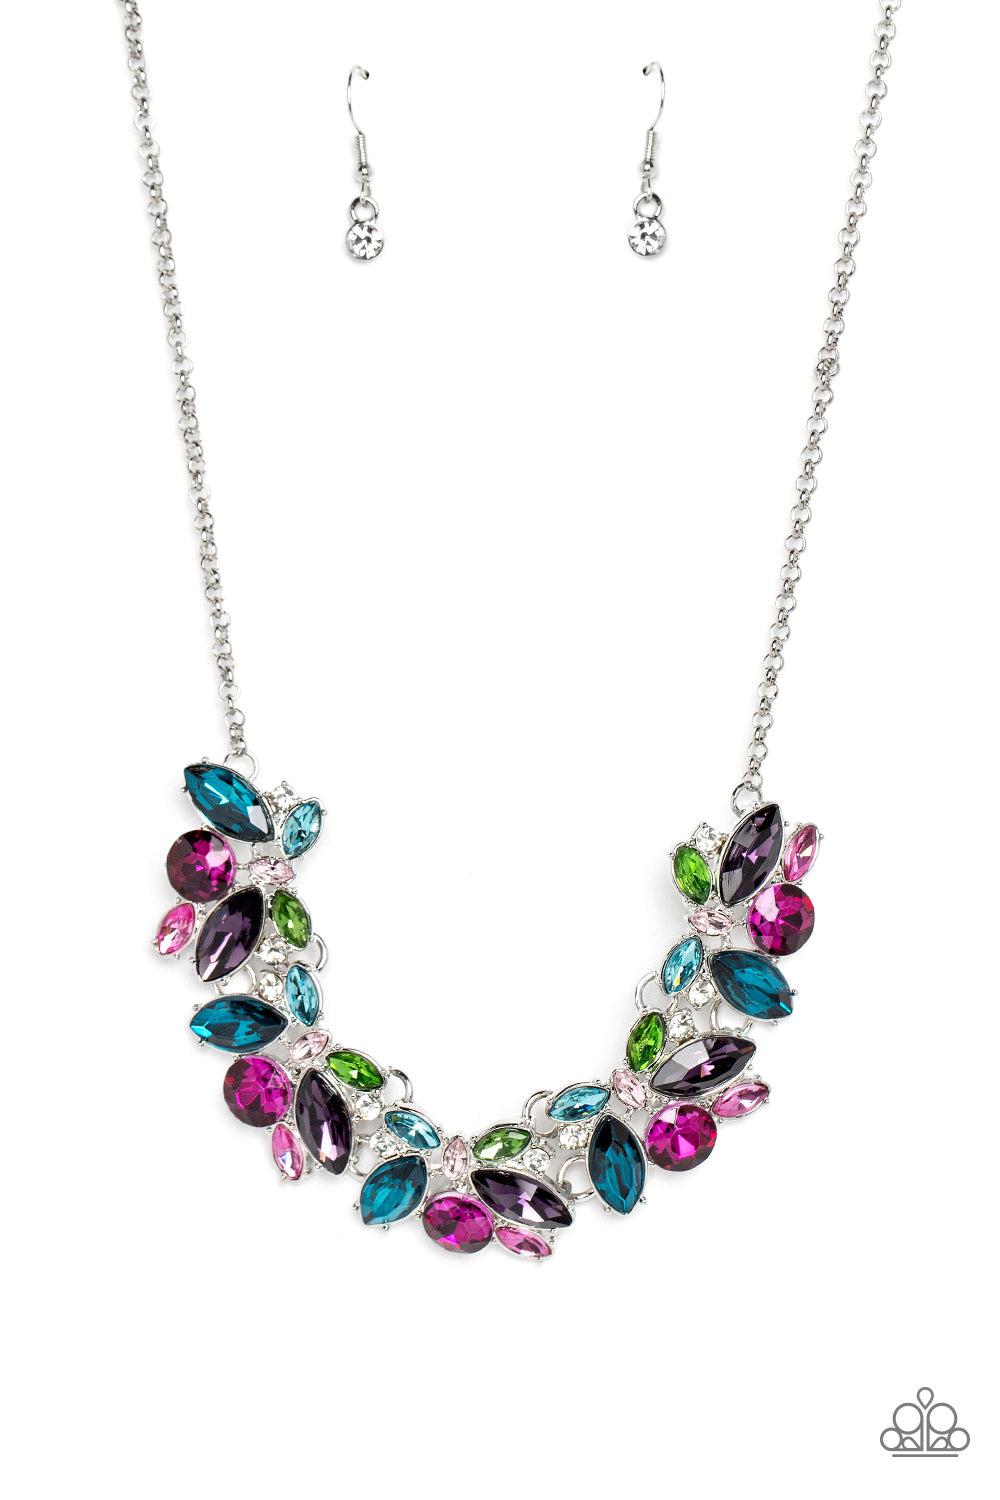 Crowning Collection Multi Rhinestone Necklace - Paparazzi Accessories- lightbox - CarasShop.com - $5 Jewelry by Cara Jewels